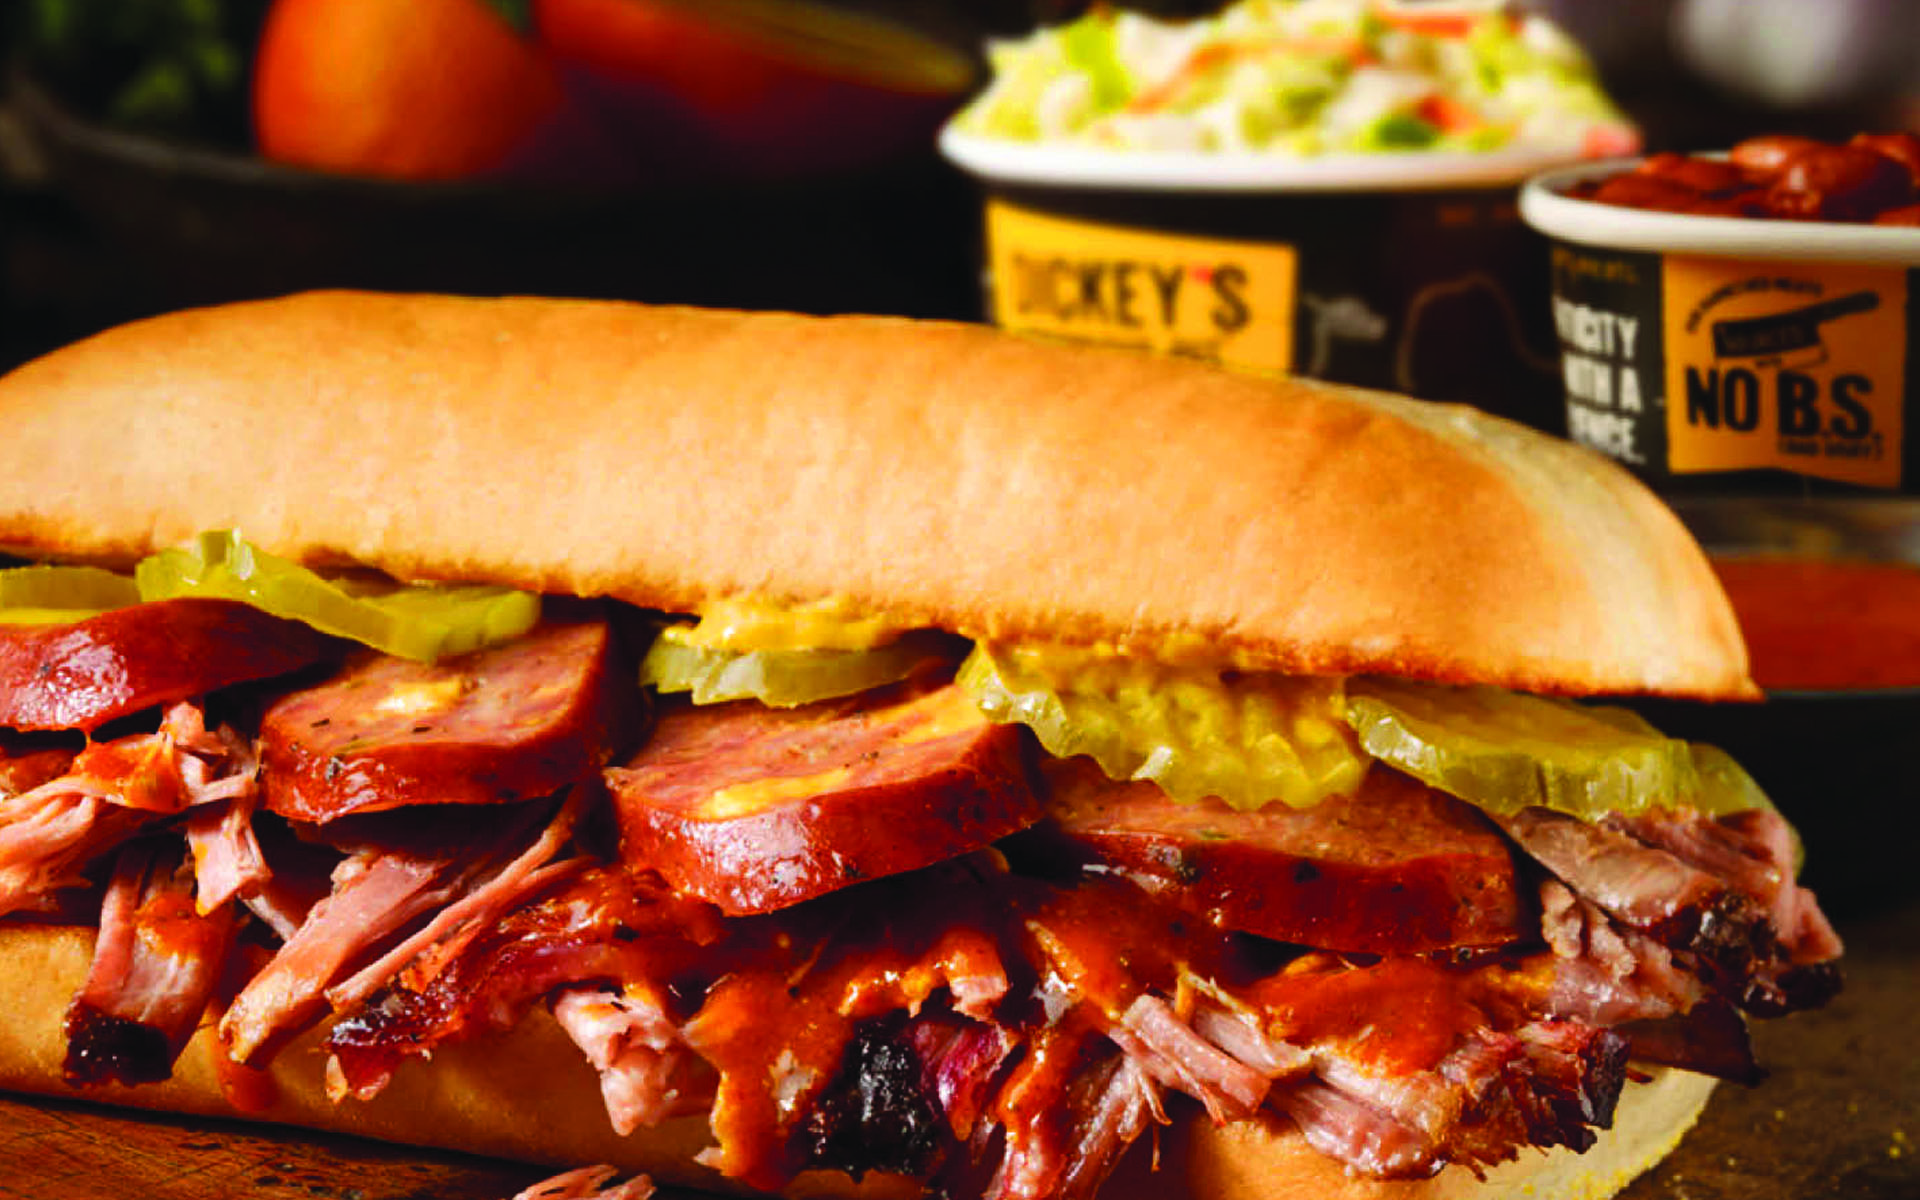 Dickey's Barbecue Pit in Nampa, ID at Restaurant.com